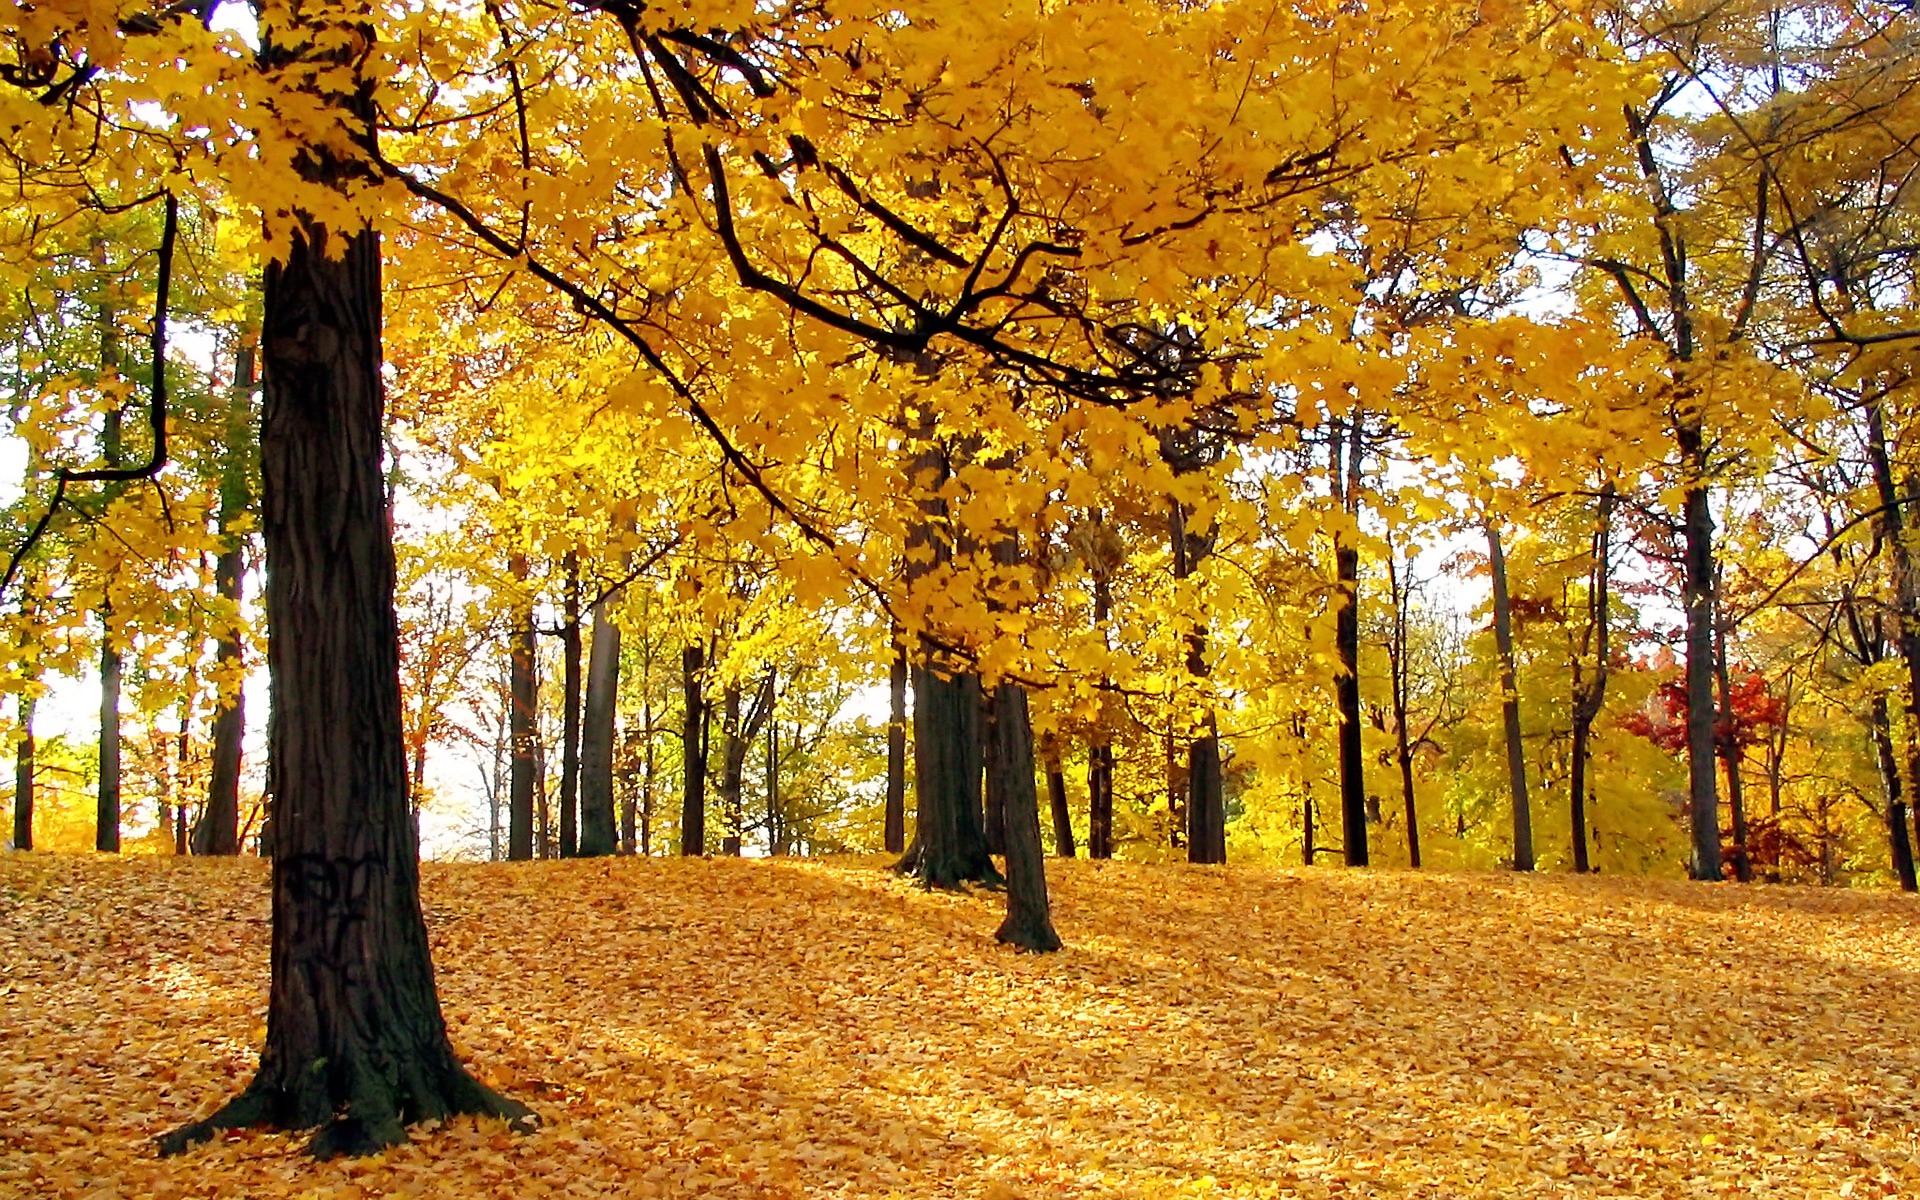 Autumn Trees Wallpaper Autumn Nature Wallpapers in jpg format for ...